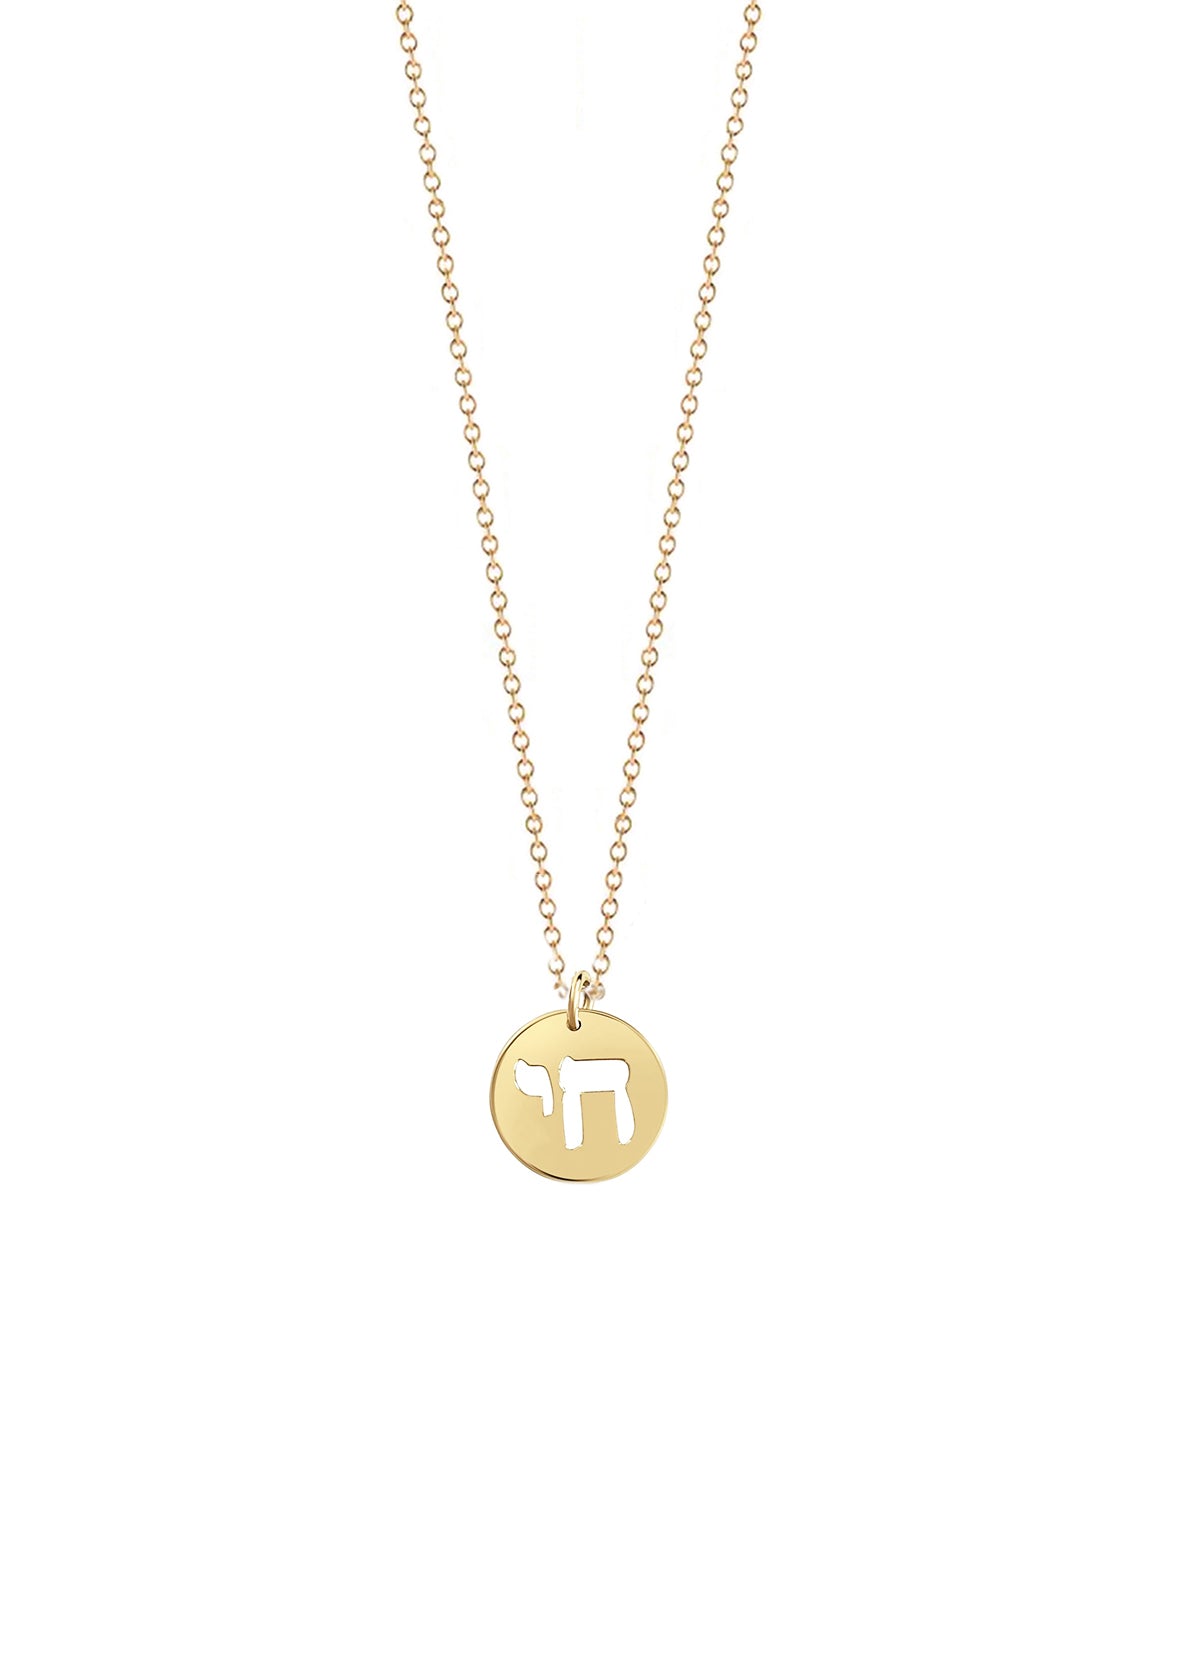 Tiny Chai Necklace in 14k Yellow Gold